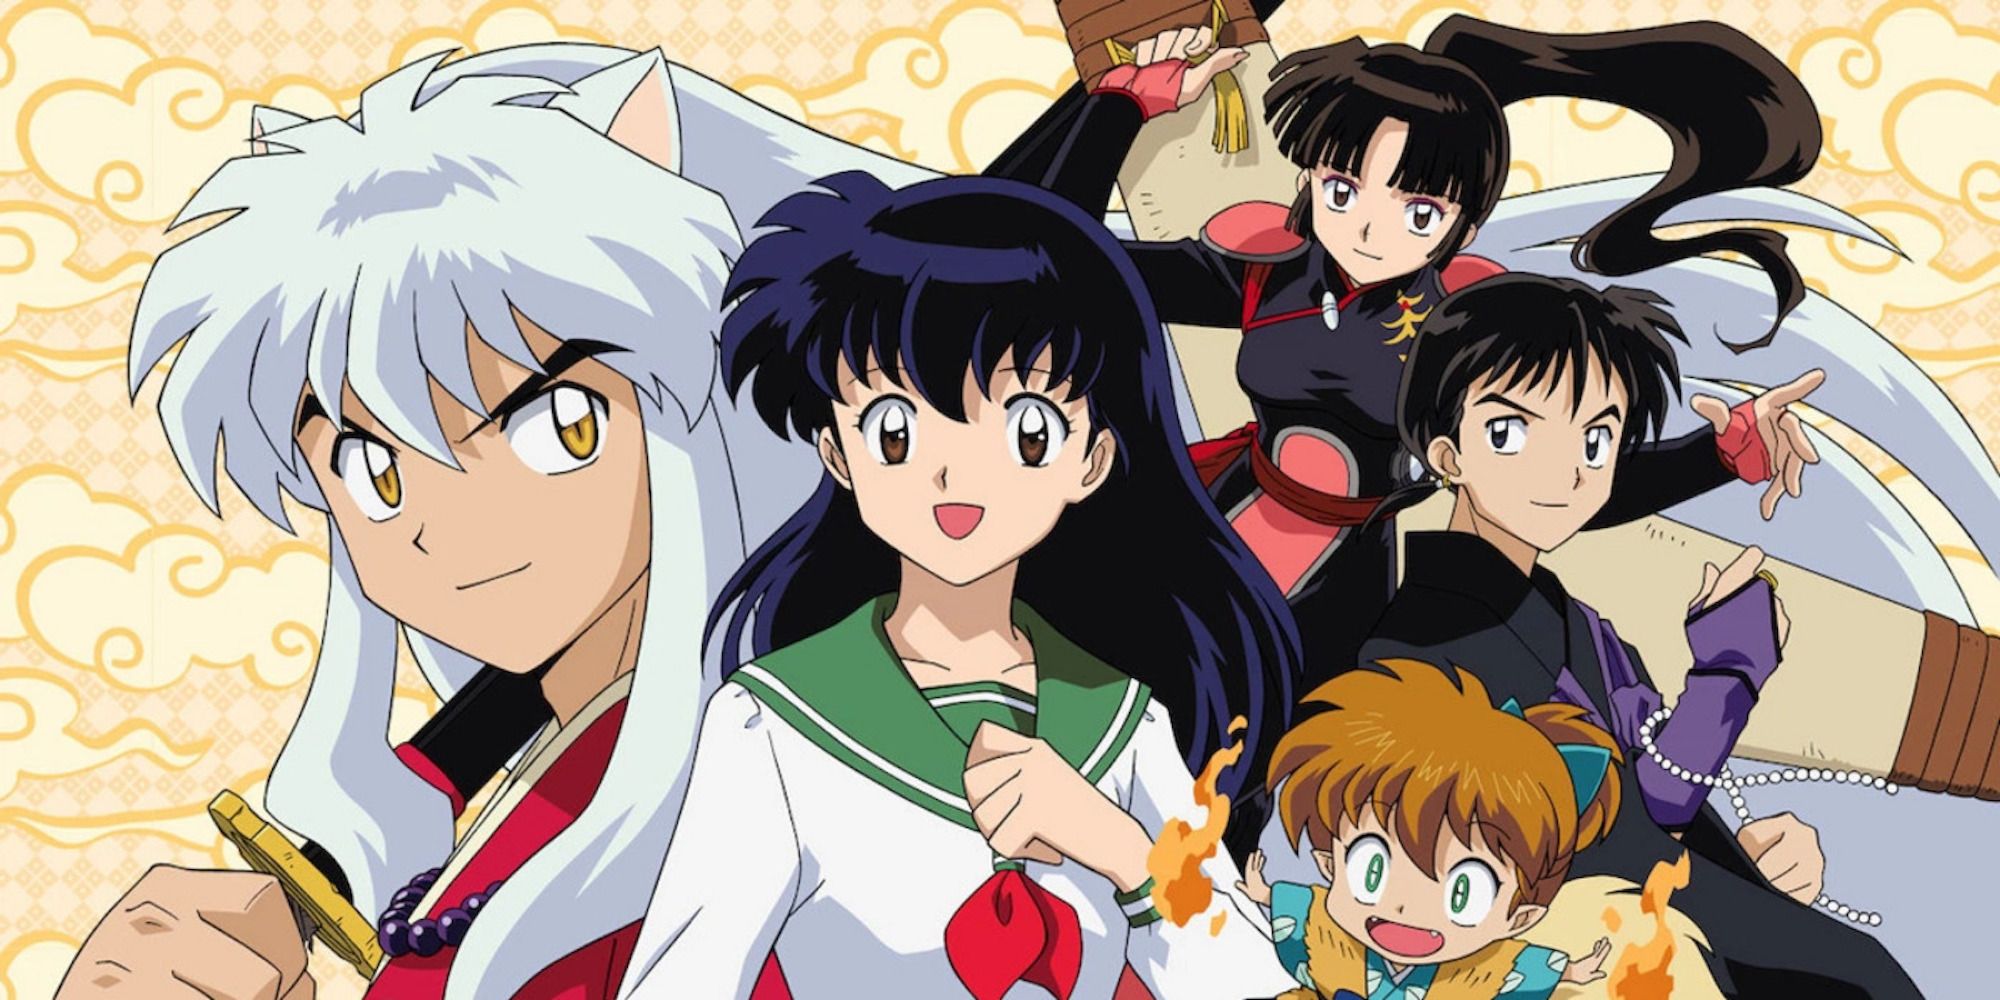 Promo art featuring characters from Inuyasha